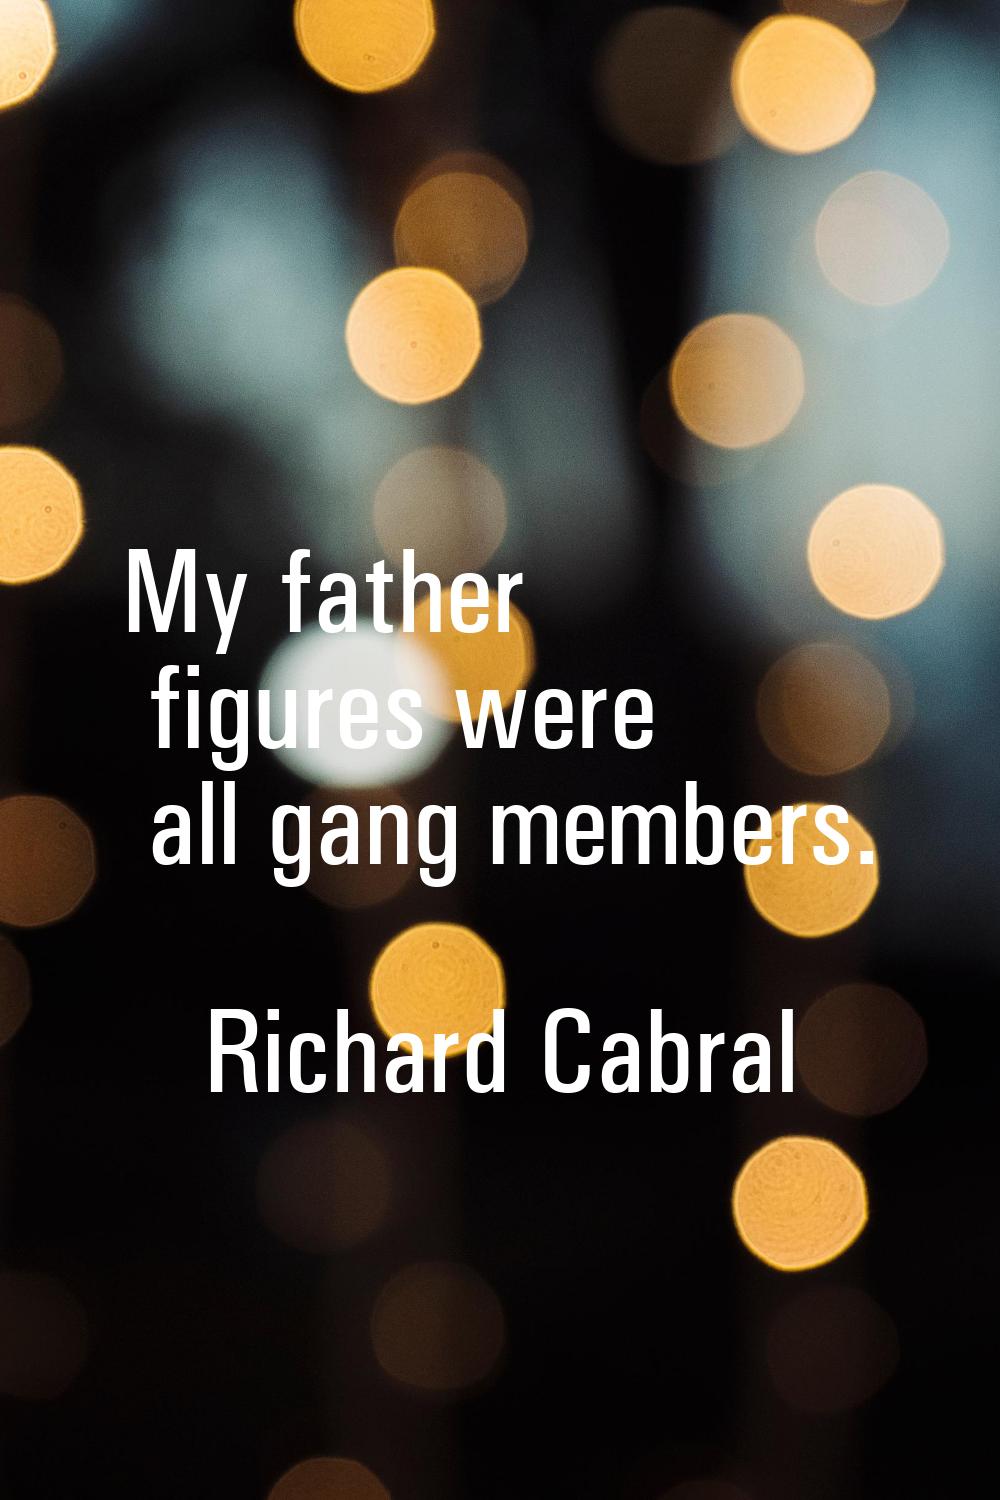 My father figures were all gang members.